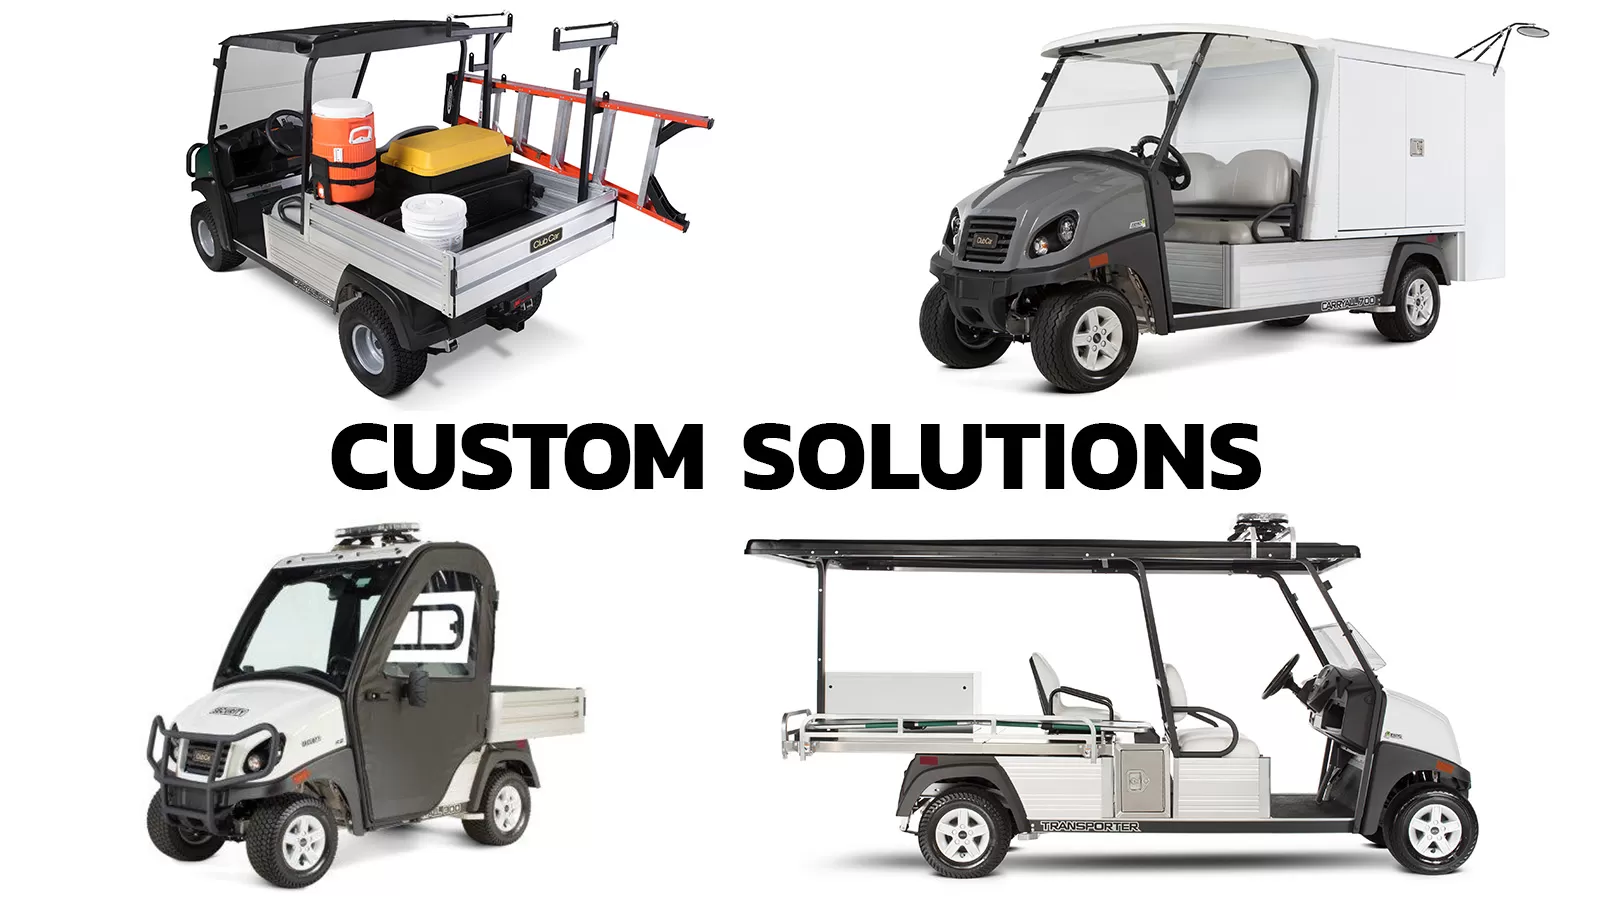 Custom Solutions: Tailored to Your Needs